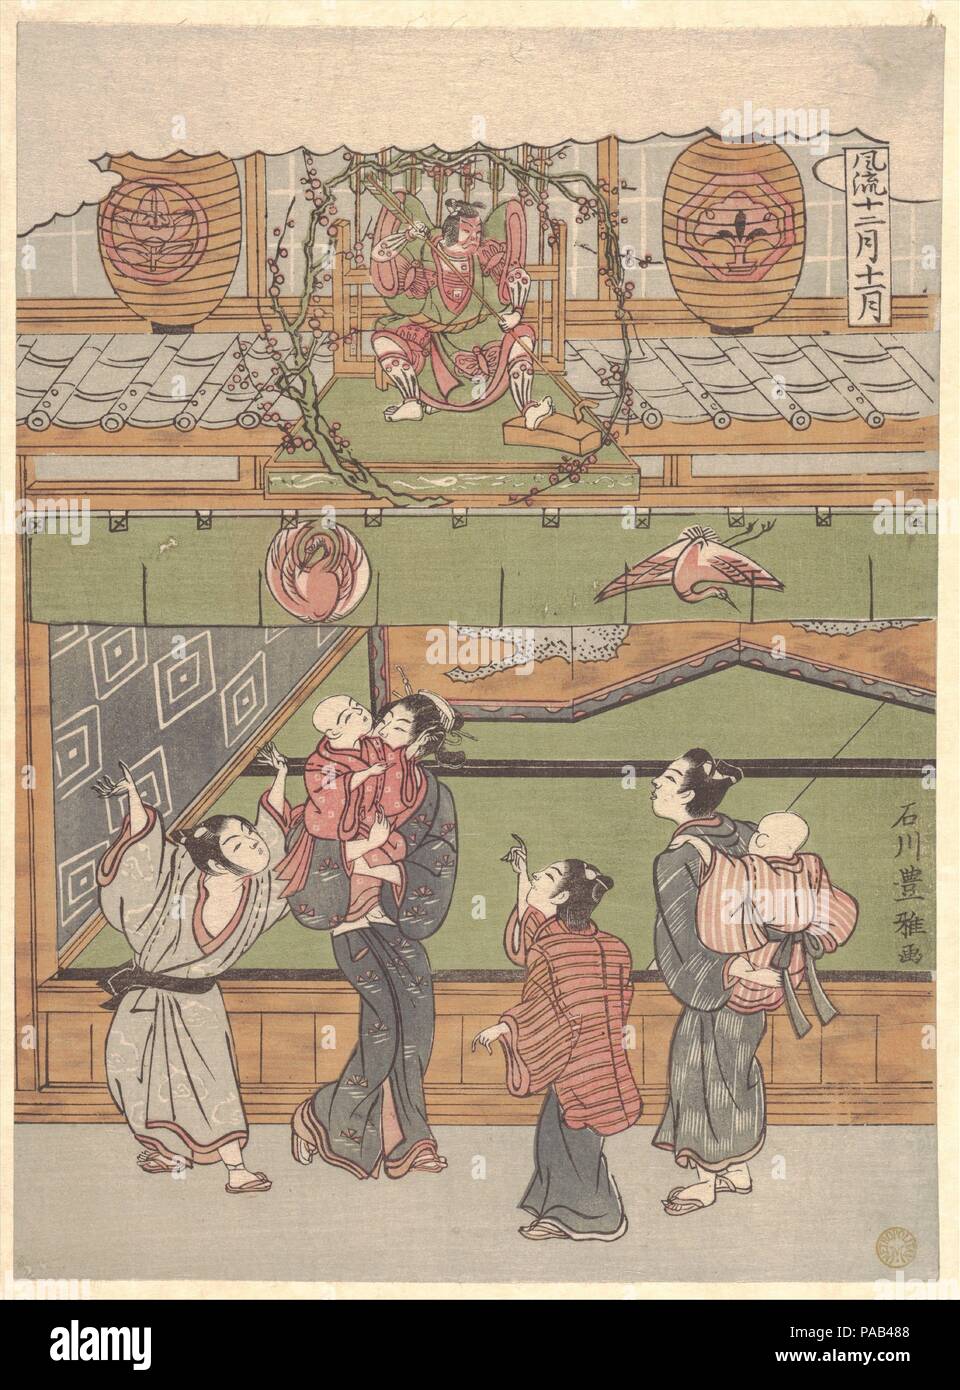 The Eleventh Month. Artist: Ishikawa Toyomasa (Japanese, active 1770-1790). Culture: Japan. Dimensions: H. 10 in. (25.4 cm); W. 7 3/8 in. (18.7 cm). Date: ca. 1767. Museum: Metropolitan Museum of Art, New York, USA. Stock Photo